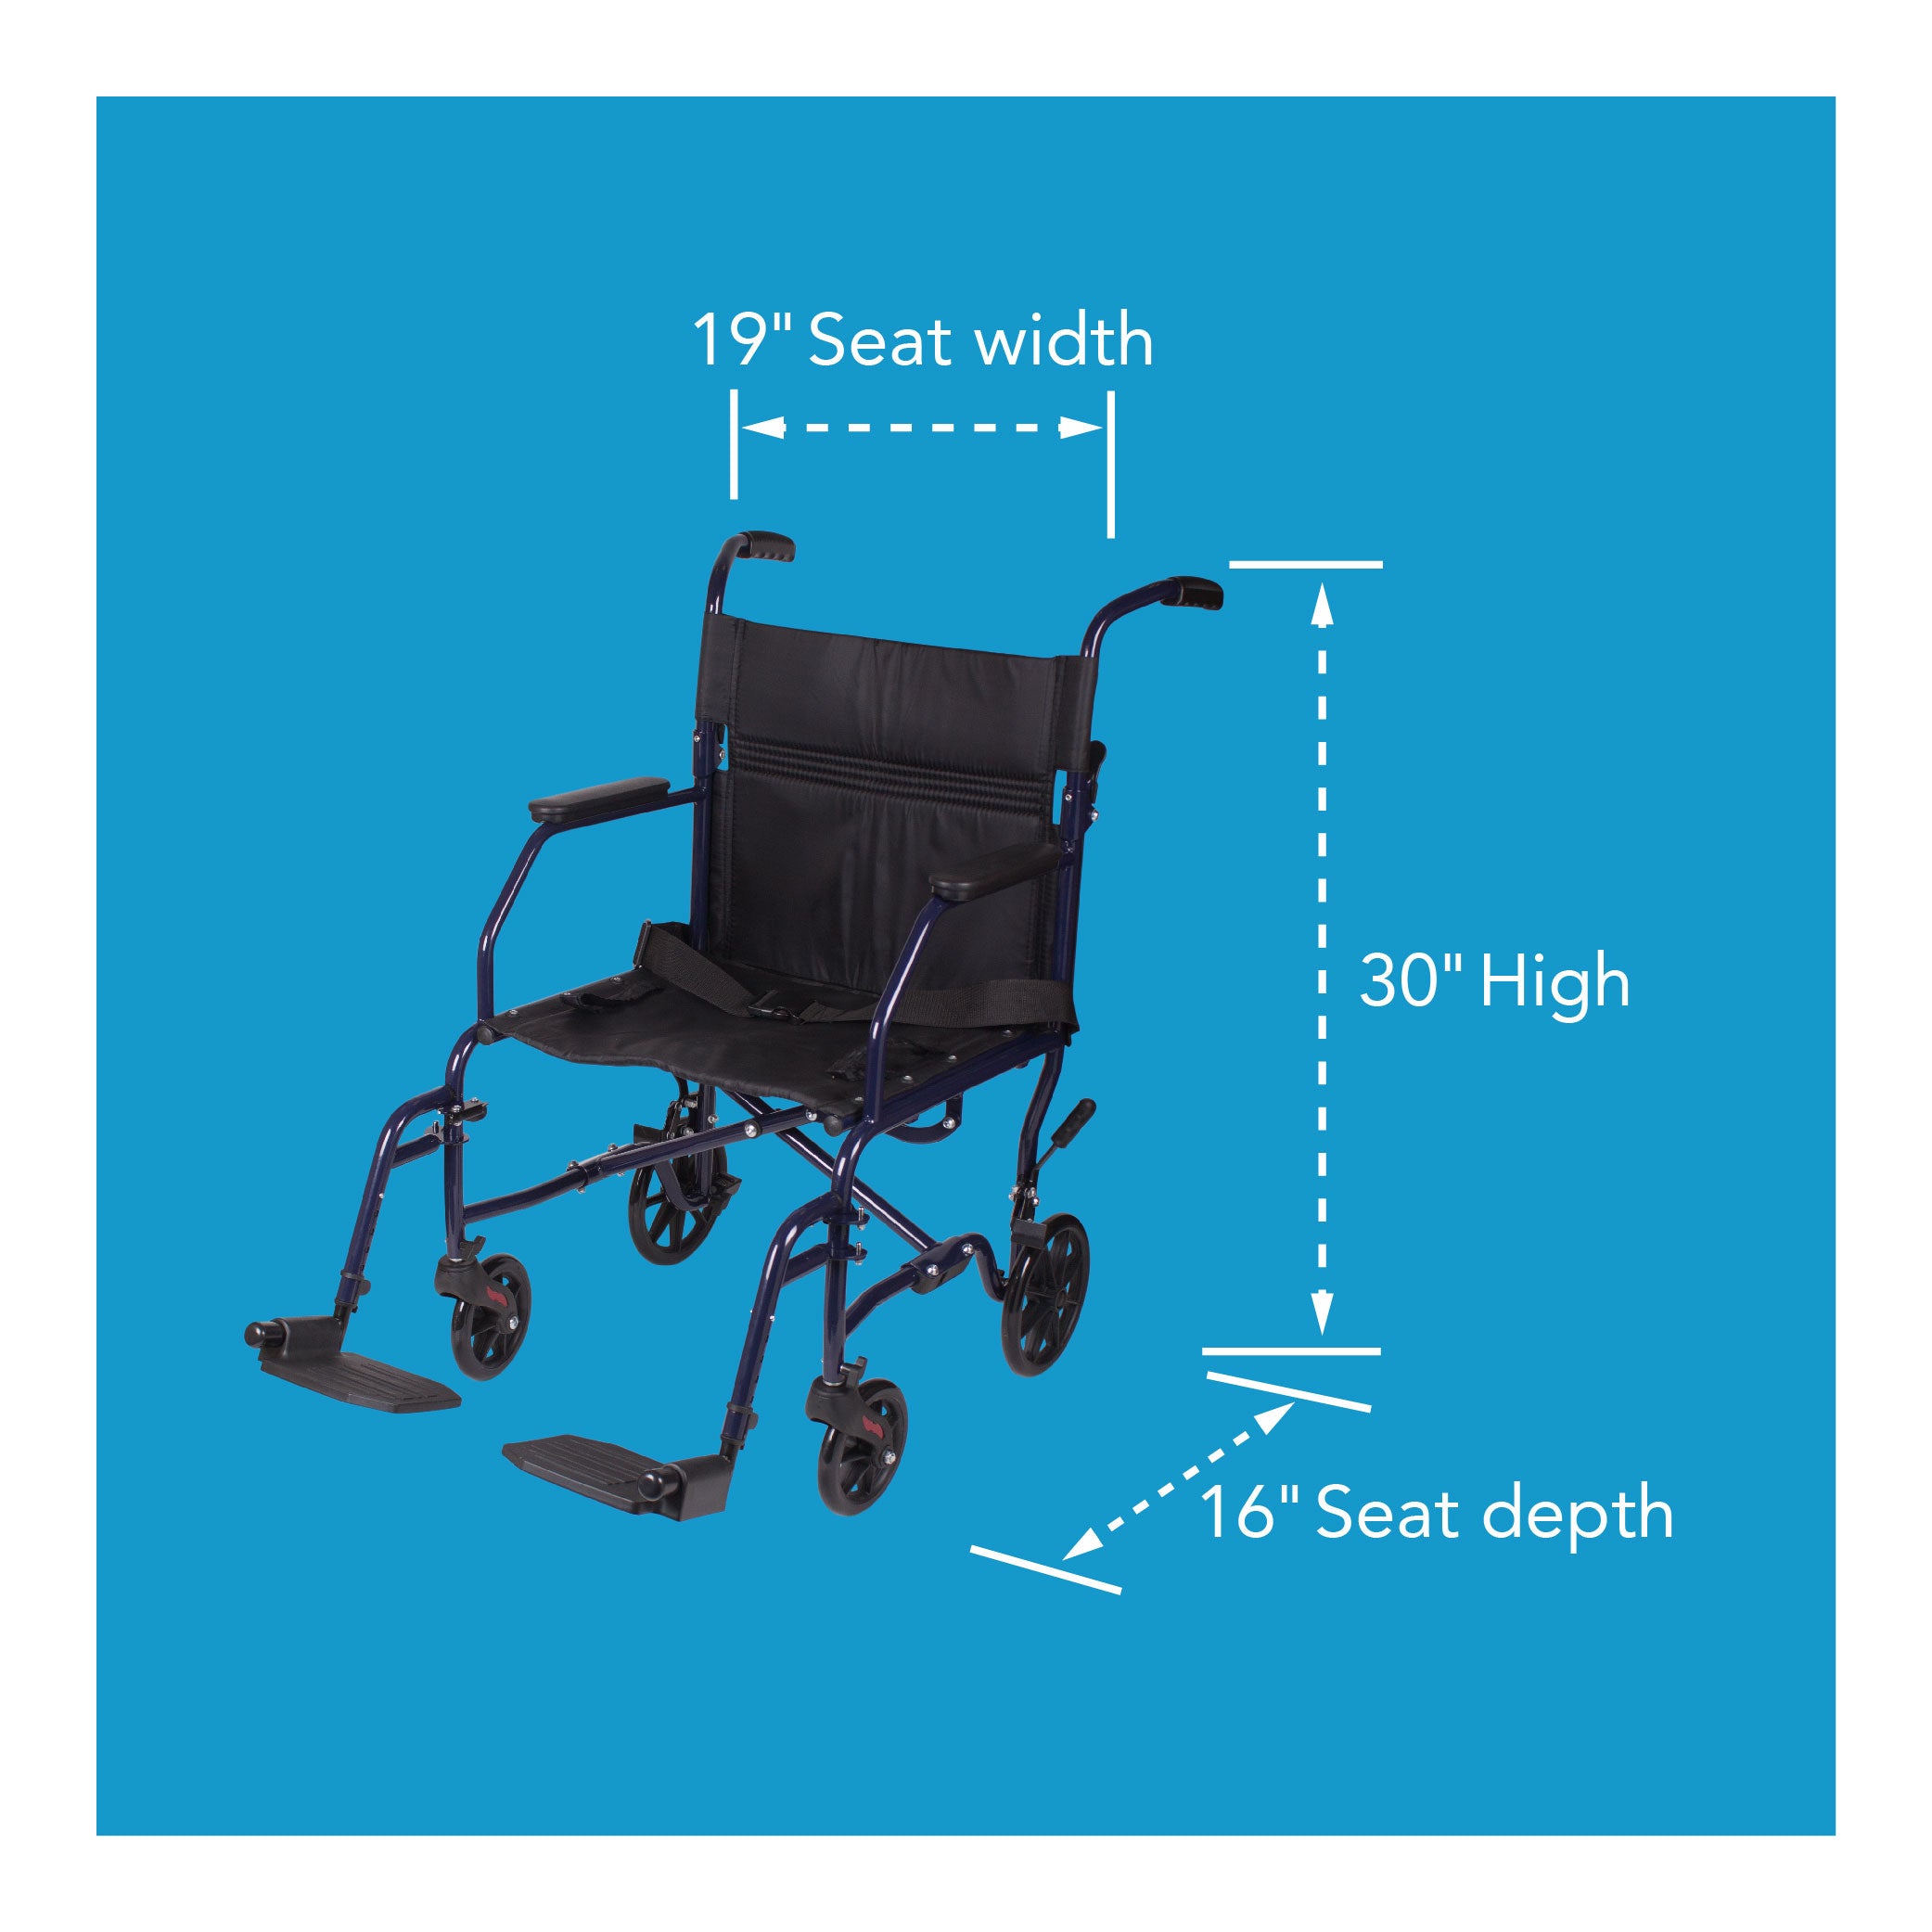 HSA and FSA Eligible Office Chair